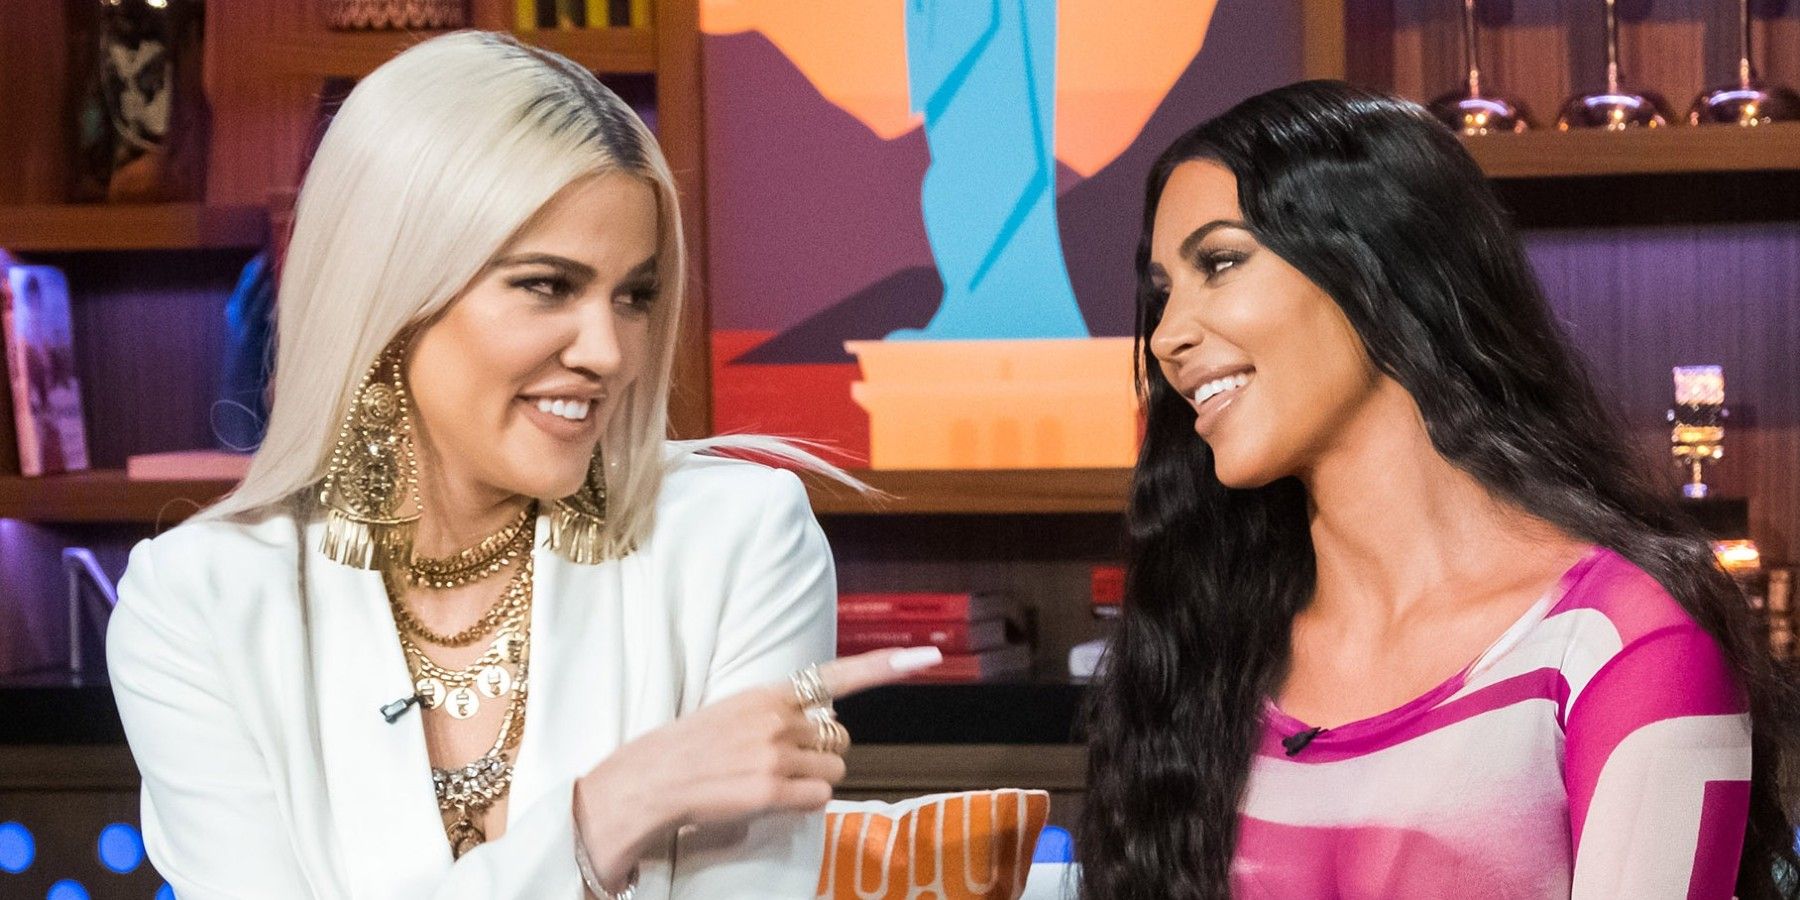 Kim and Khloe smiling as Khloe points a finger